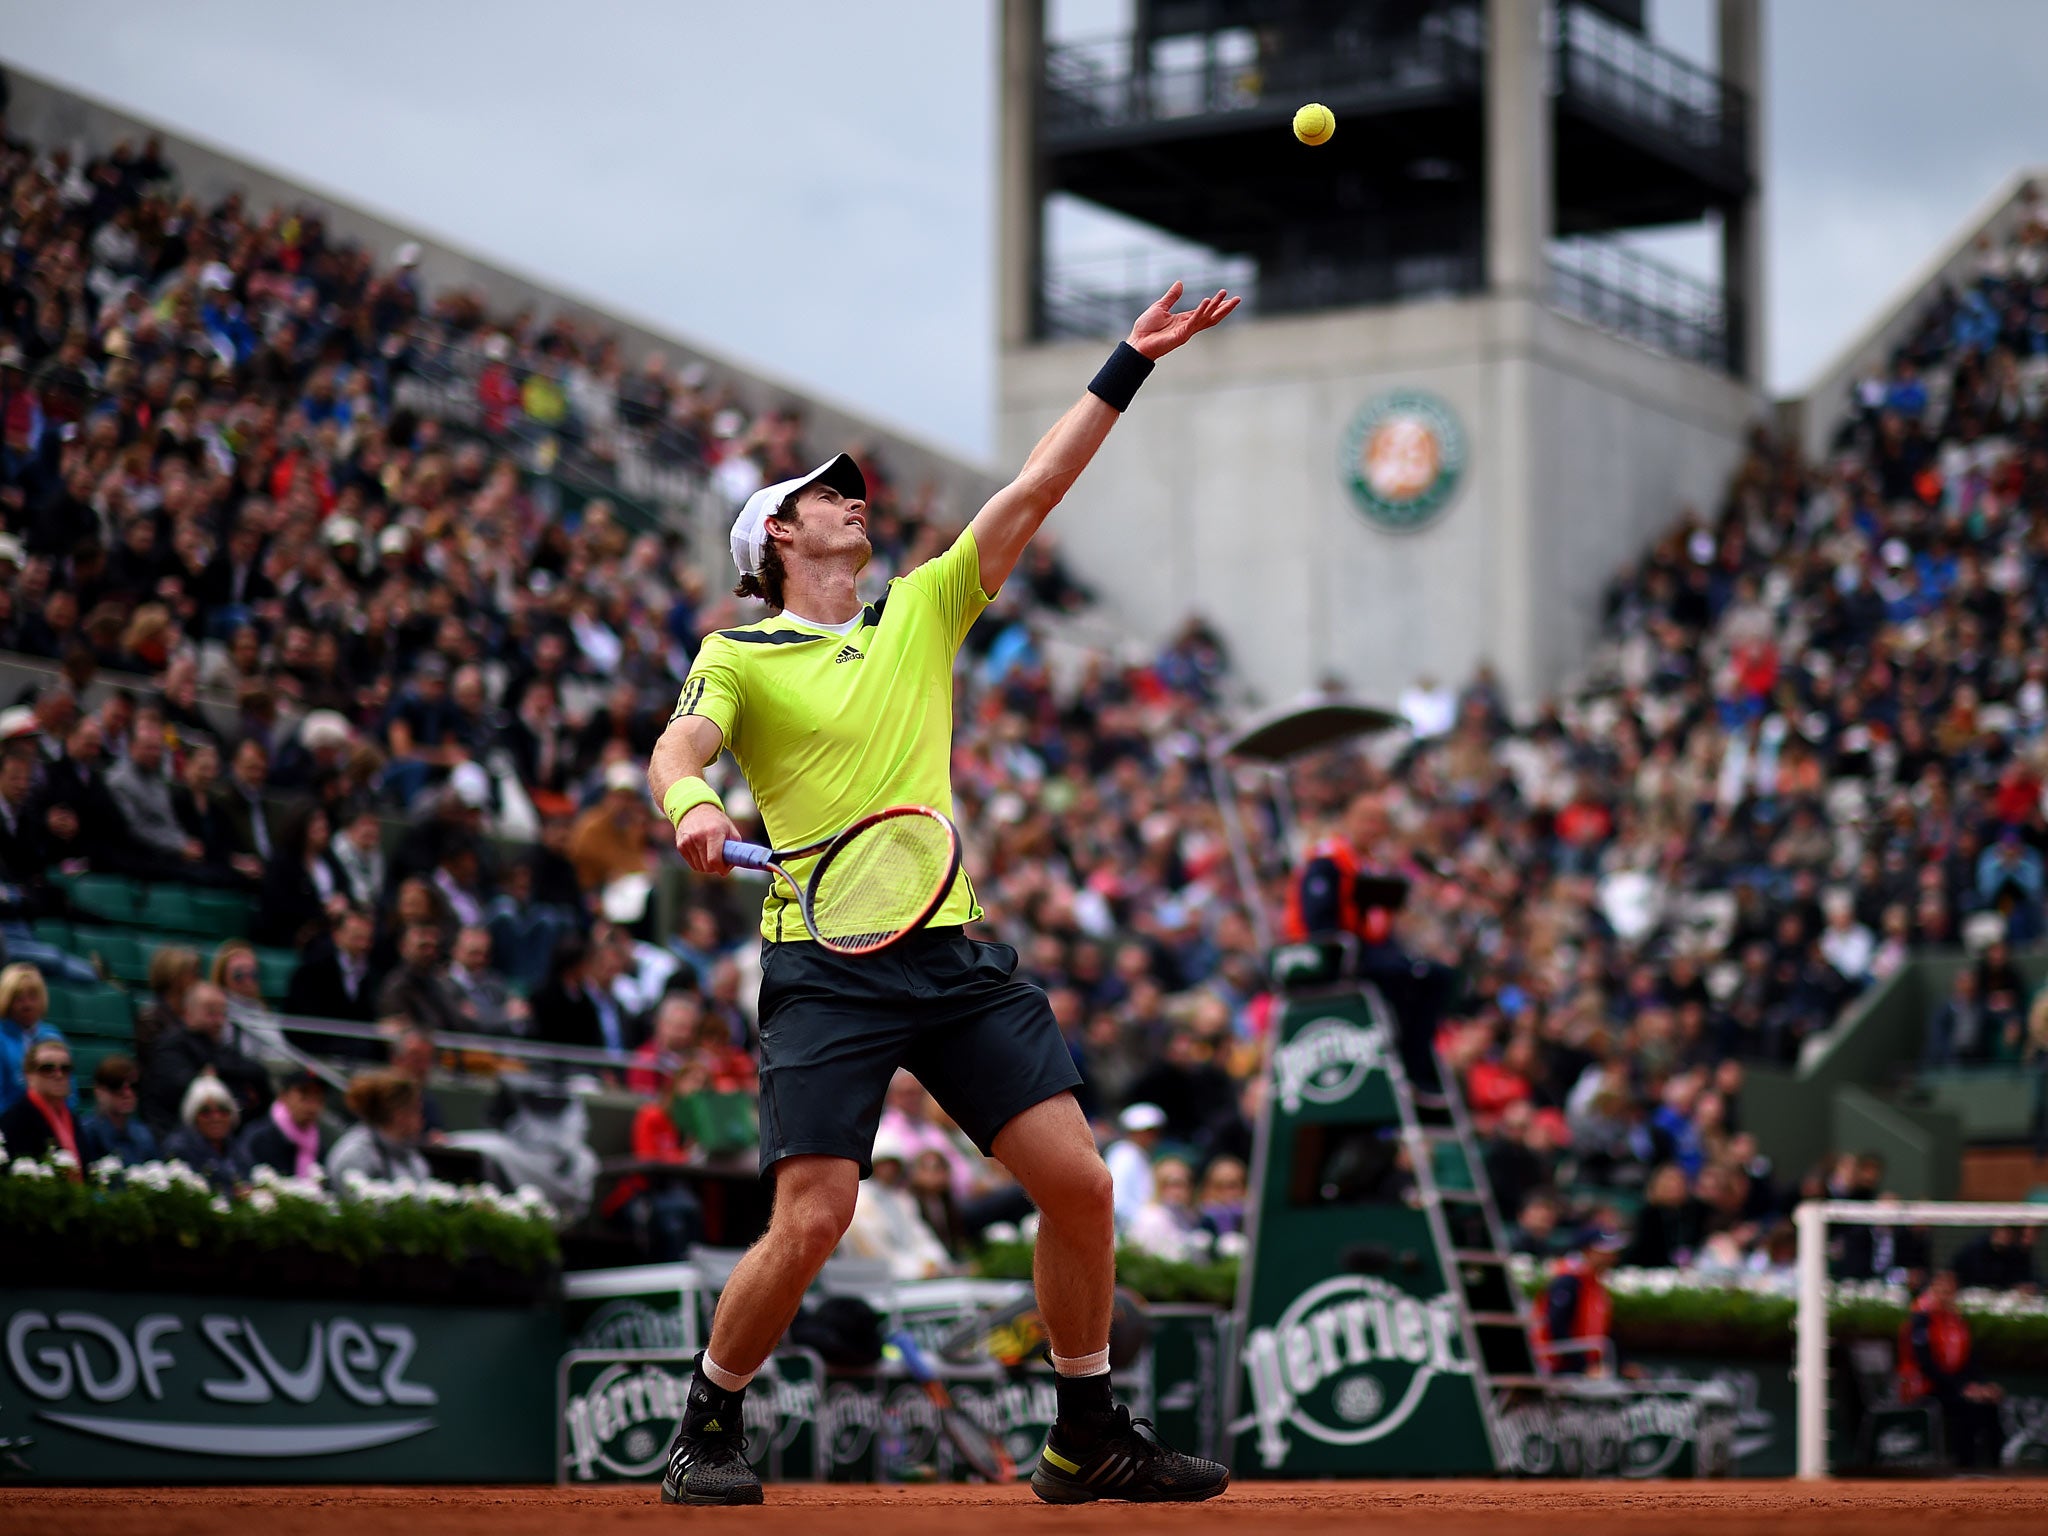 Andy Murray of Great Britain serves during his men's singles match against Andrey Golubev of Kazakhstan on day three of the French Open at Roland Garros